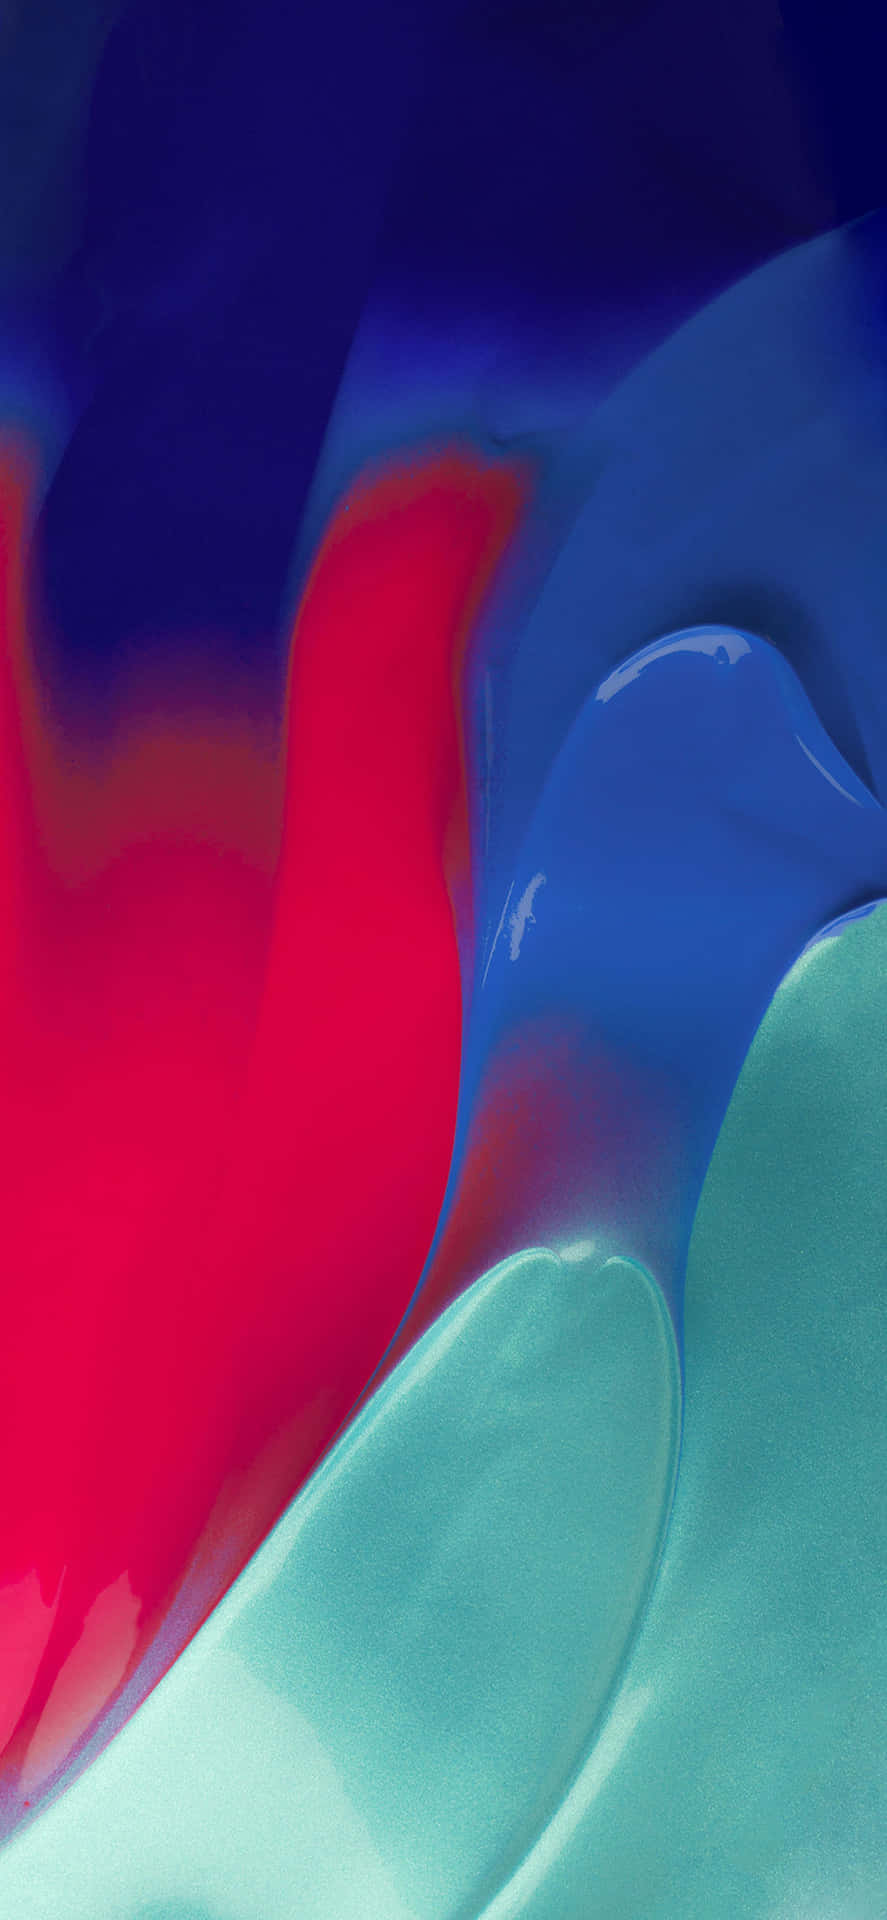 A Blue And Red Liquid